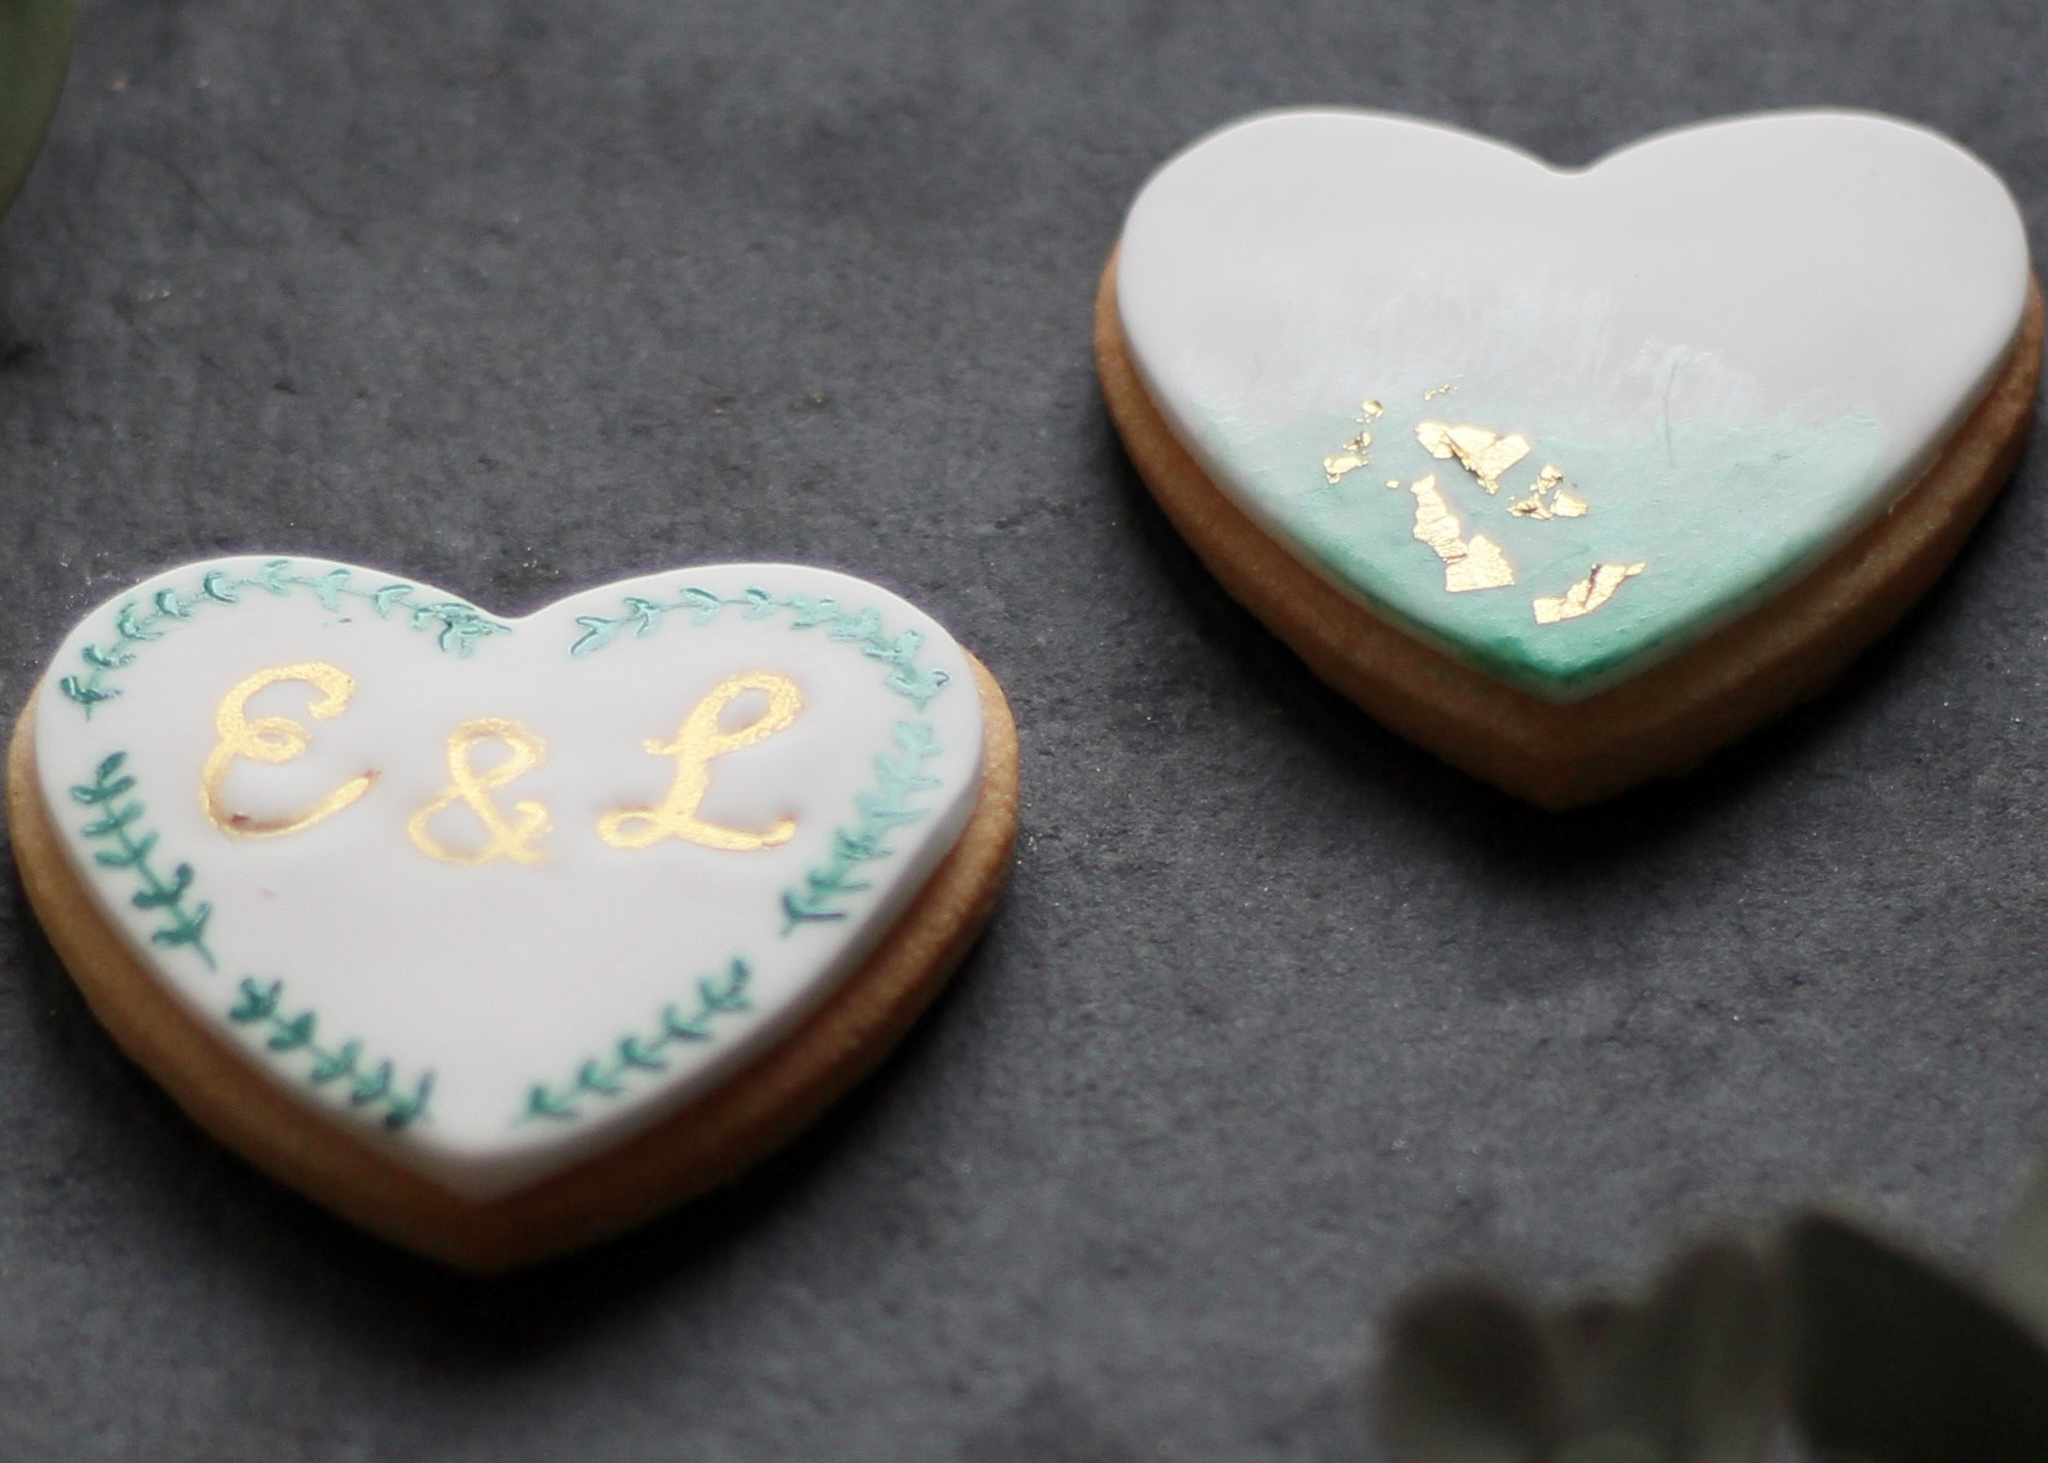 Green and gold ice biscuit wedding favours Aberdeen Scotland
              